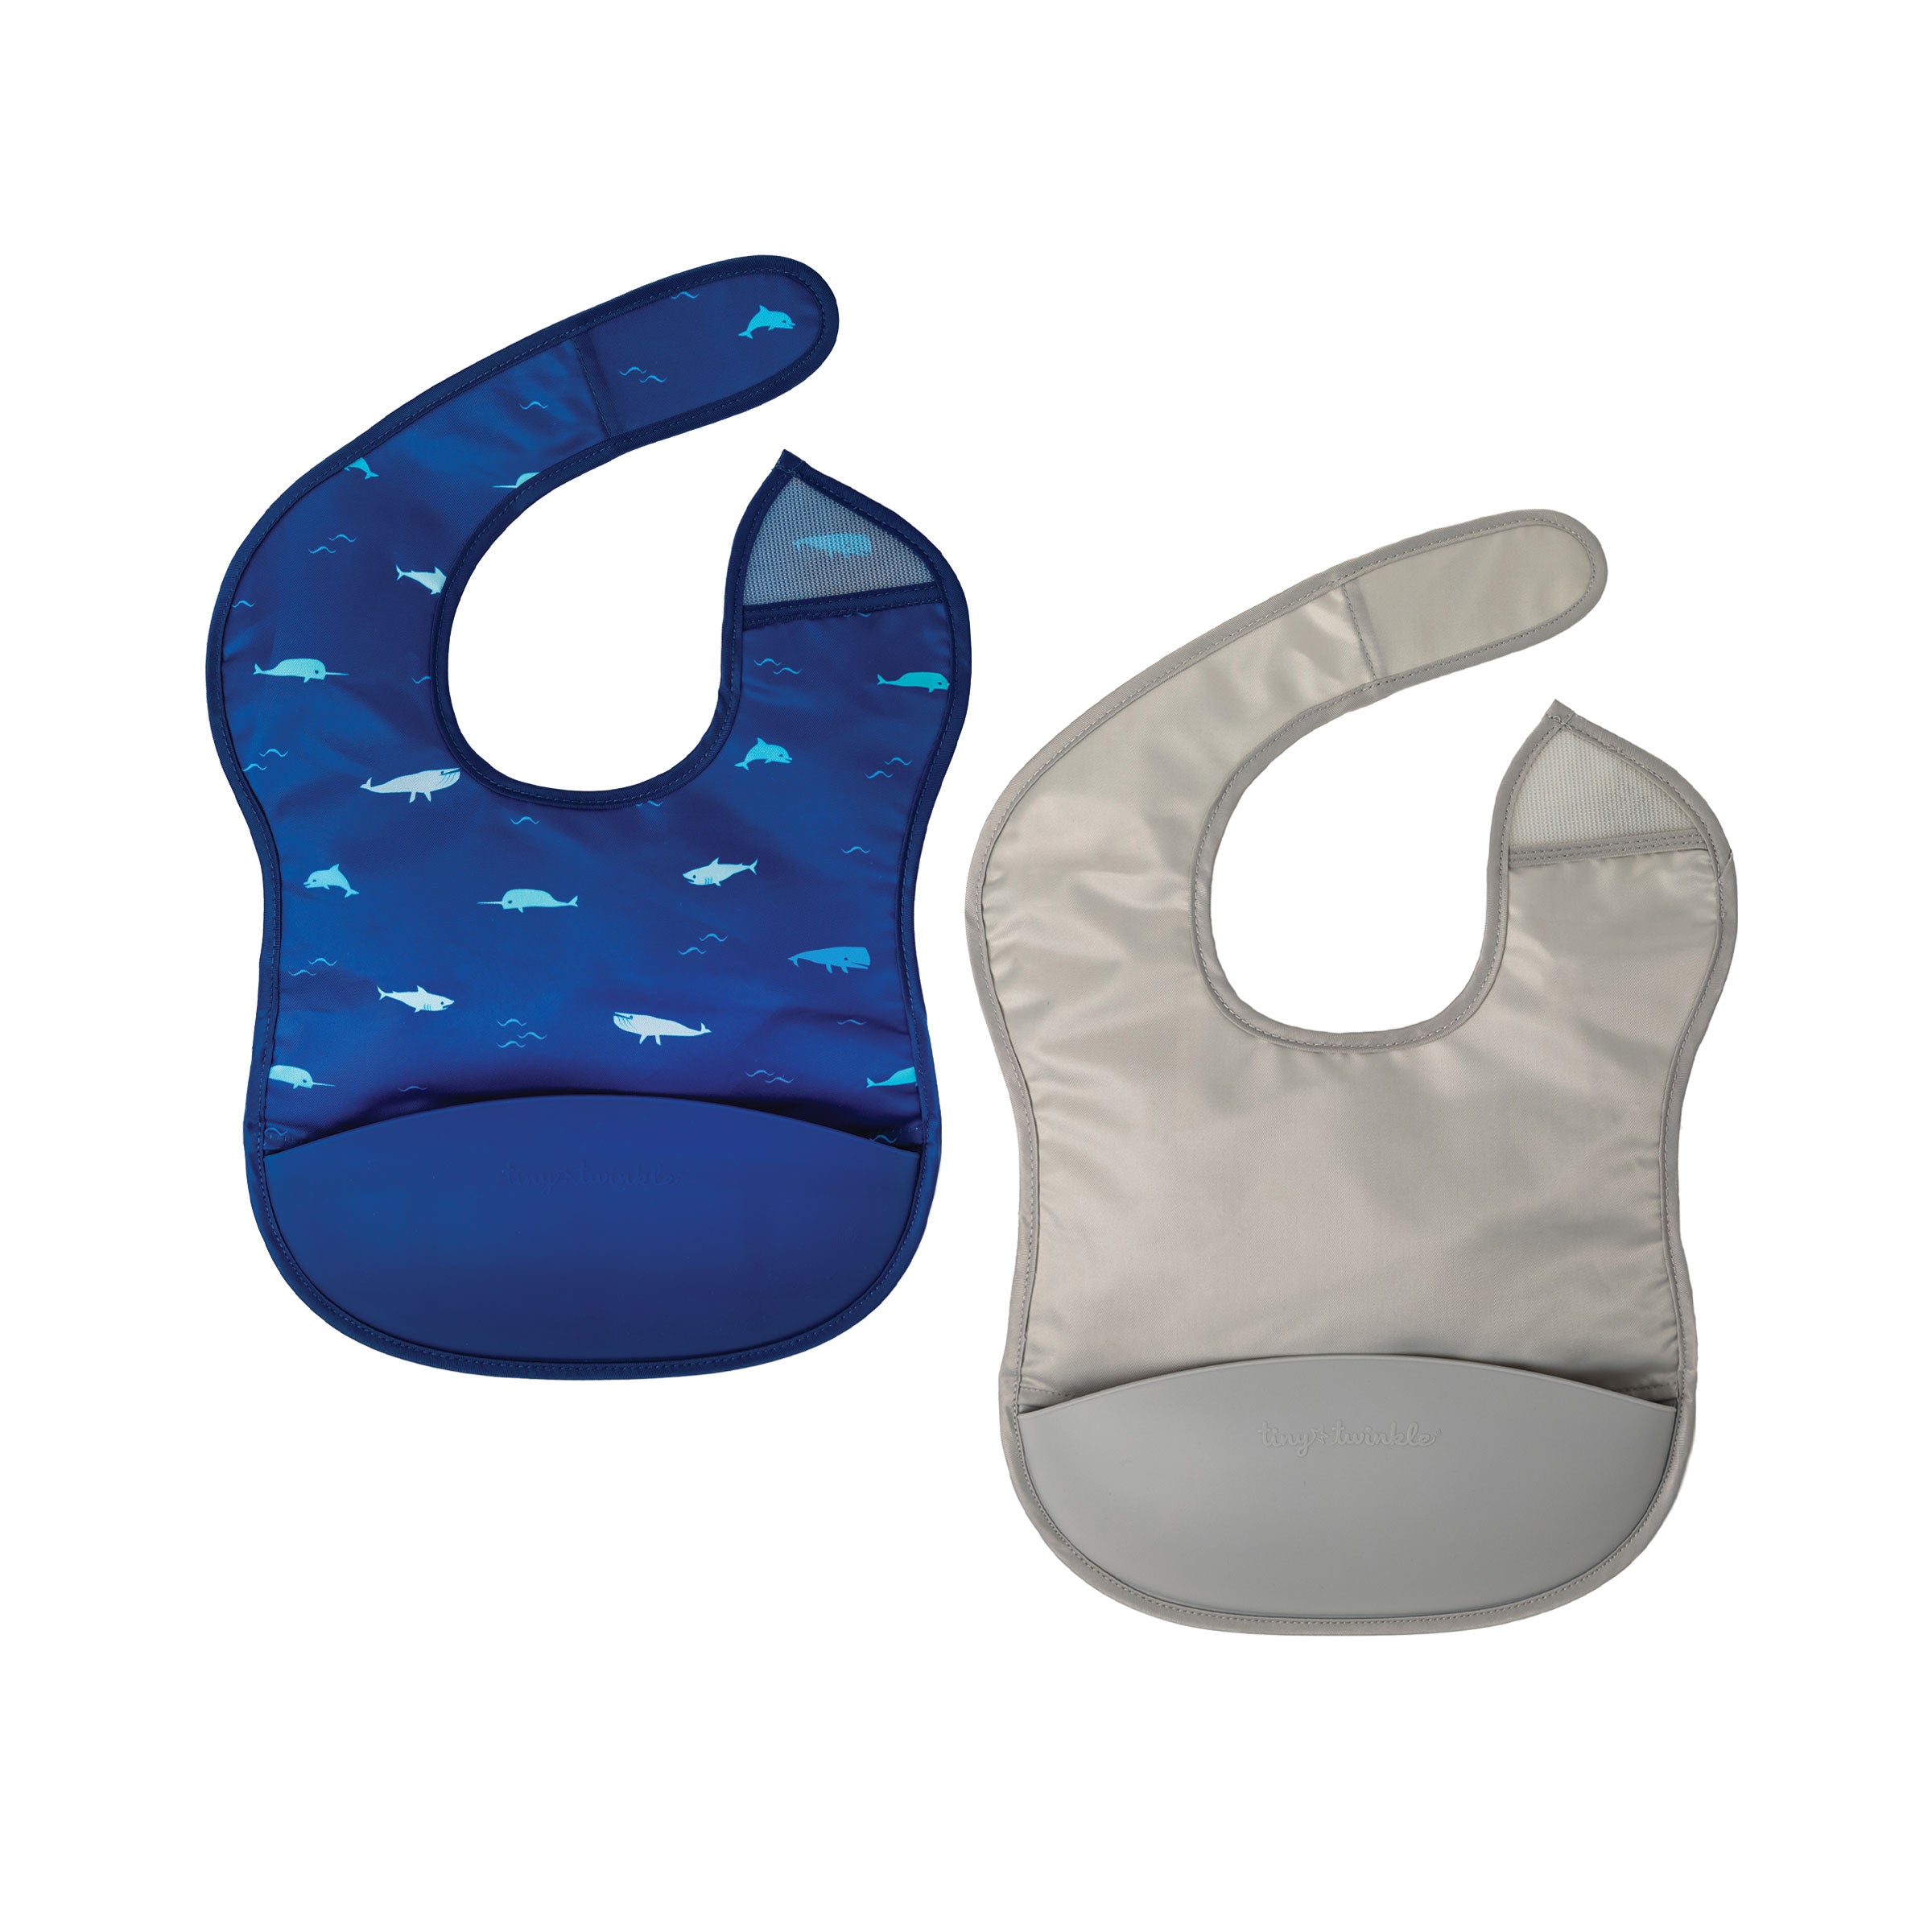 Mess-proof Silicone Pocket Bibs - 2 Pack